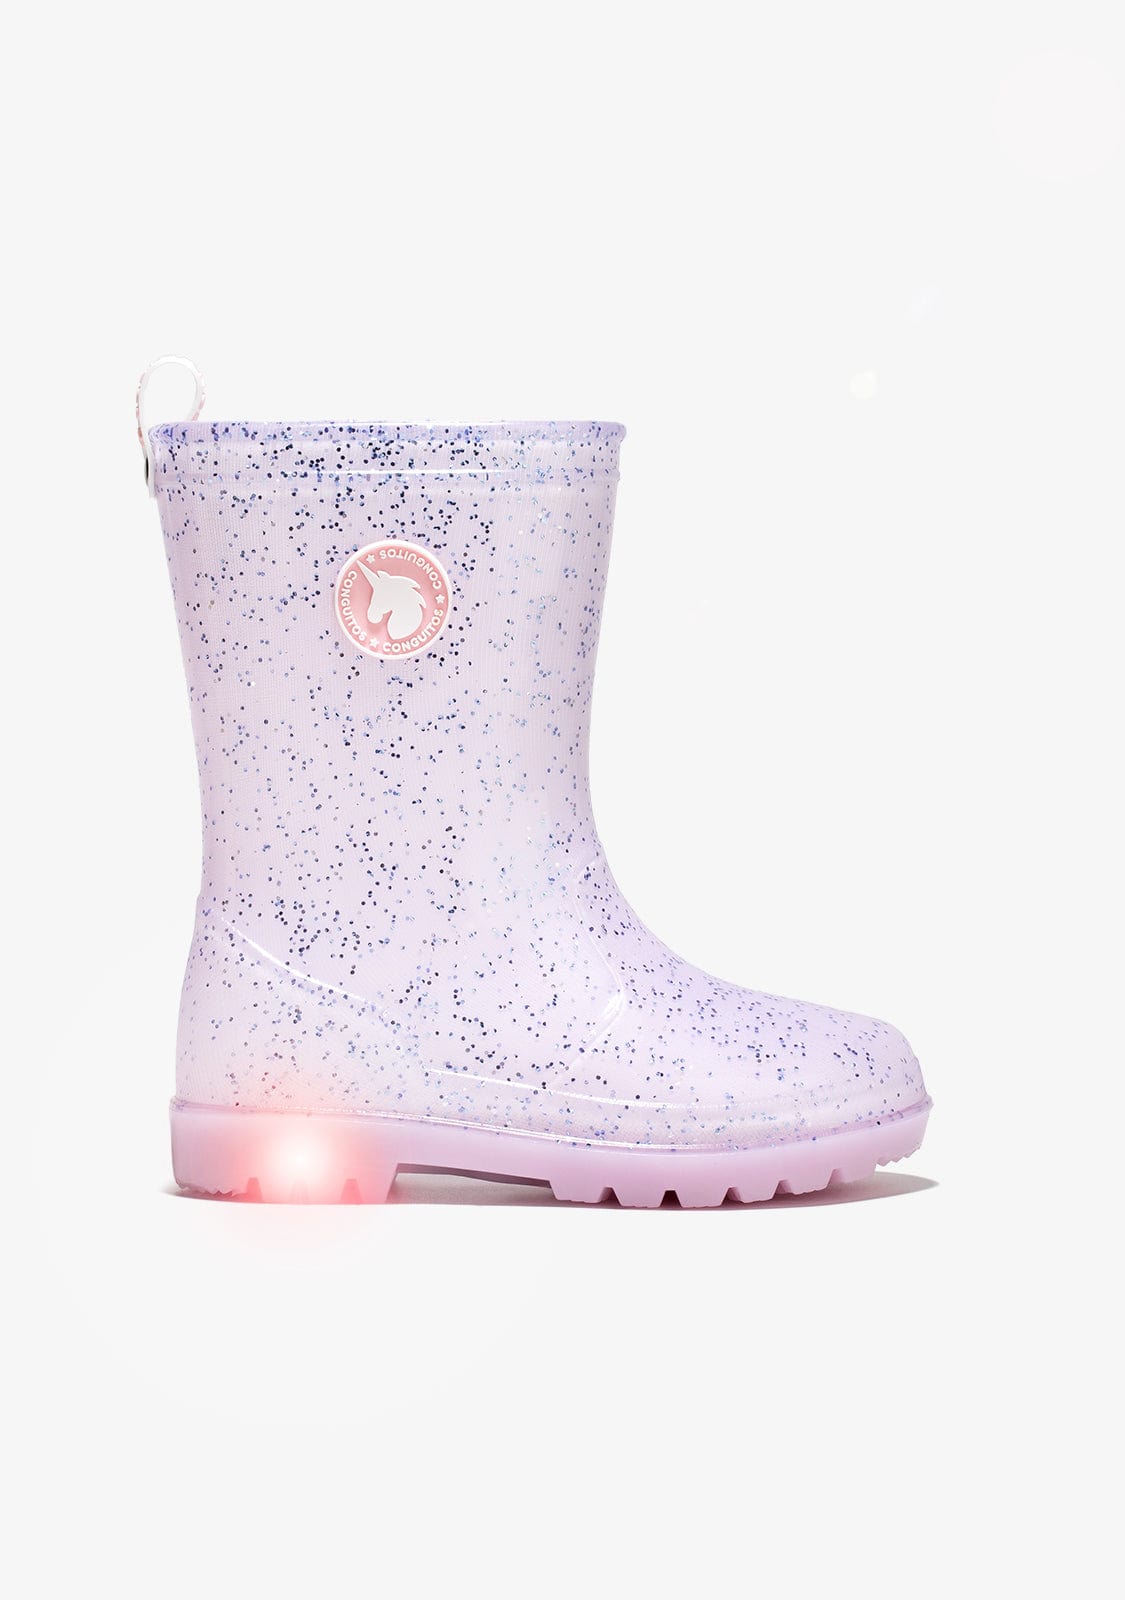 CONGUITOS Shoes Girl's Pink With Lights Rain Boots